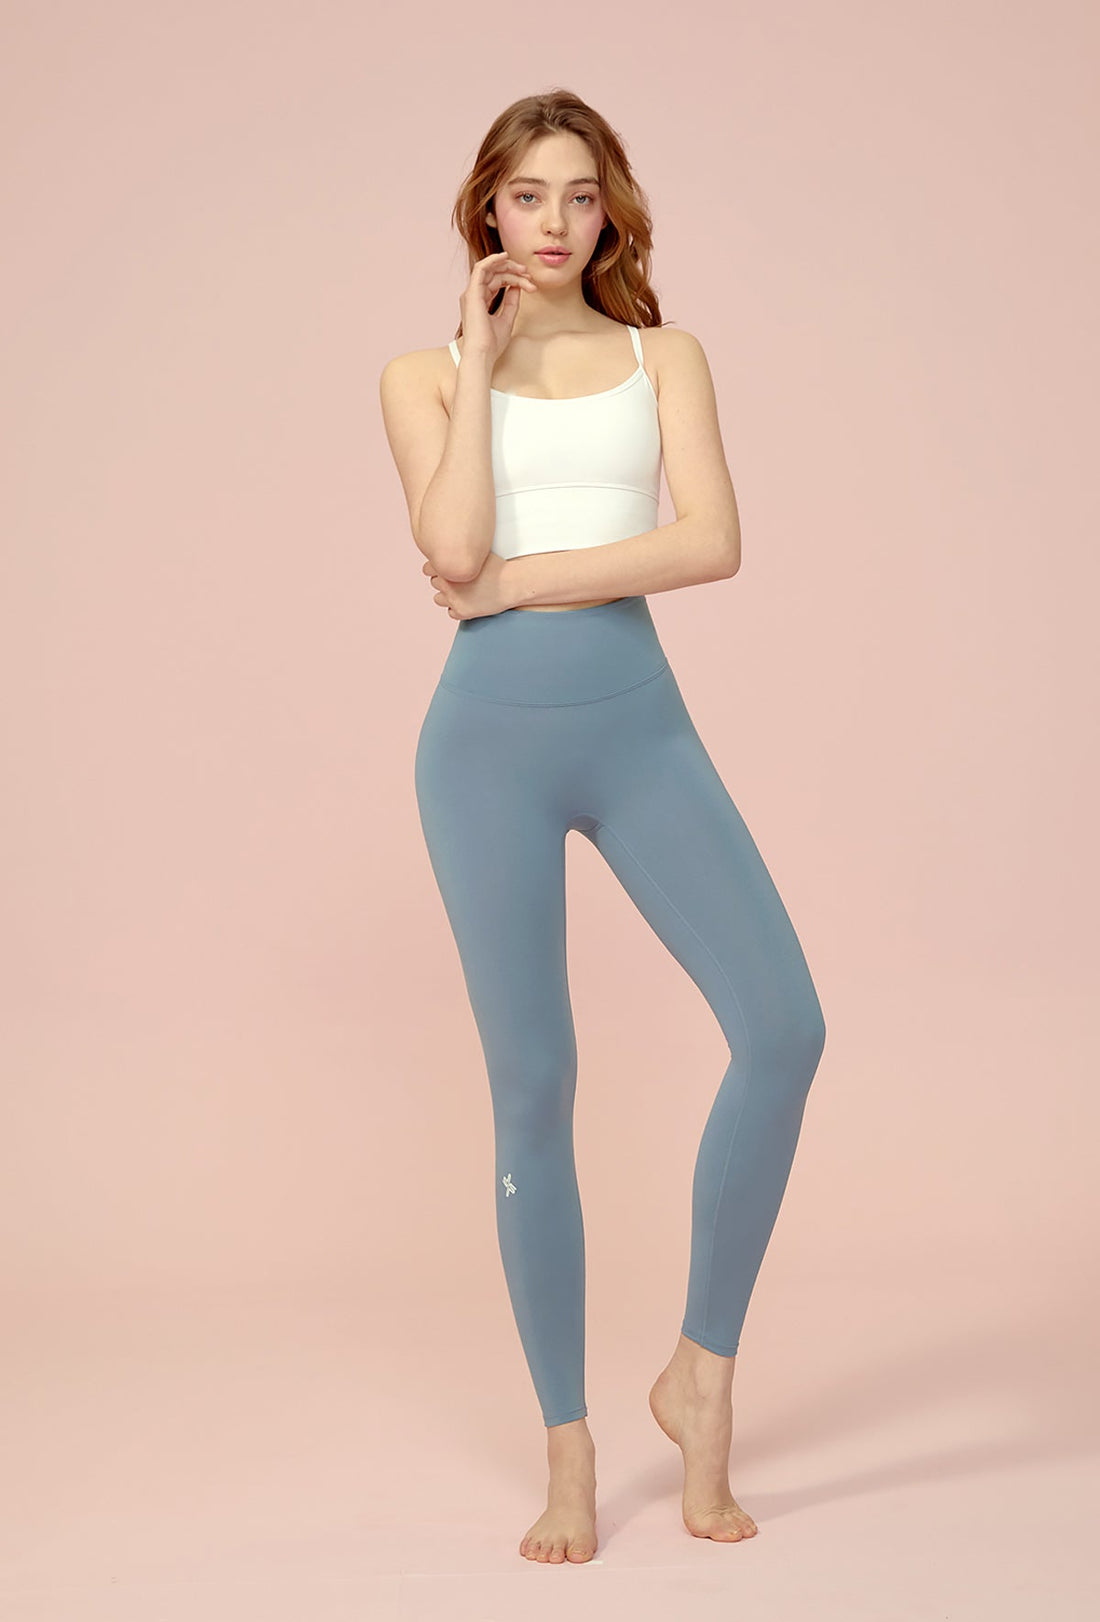 XEXYMIX Cella Uptension Leggings - Blue Gray